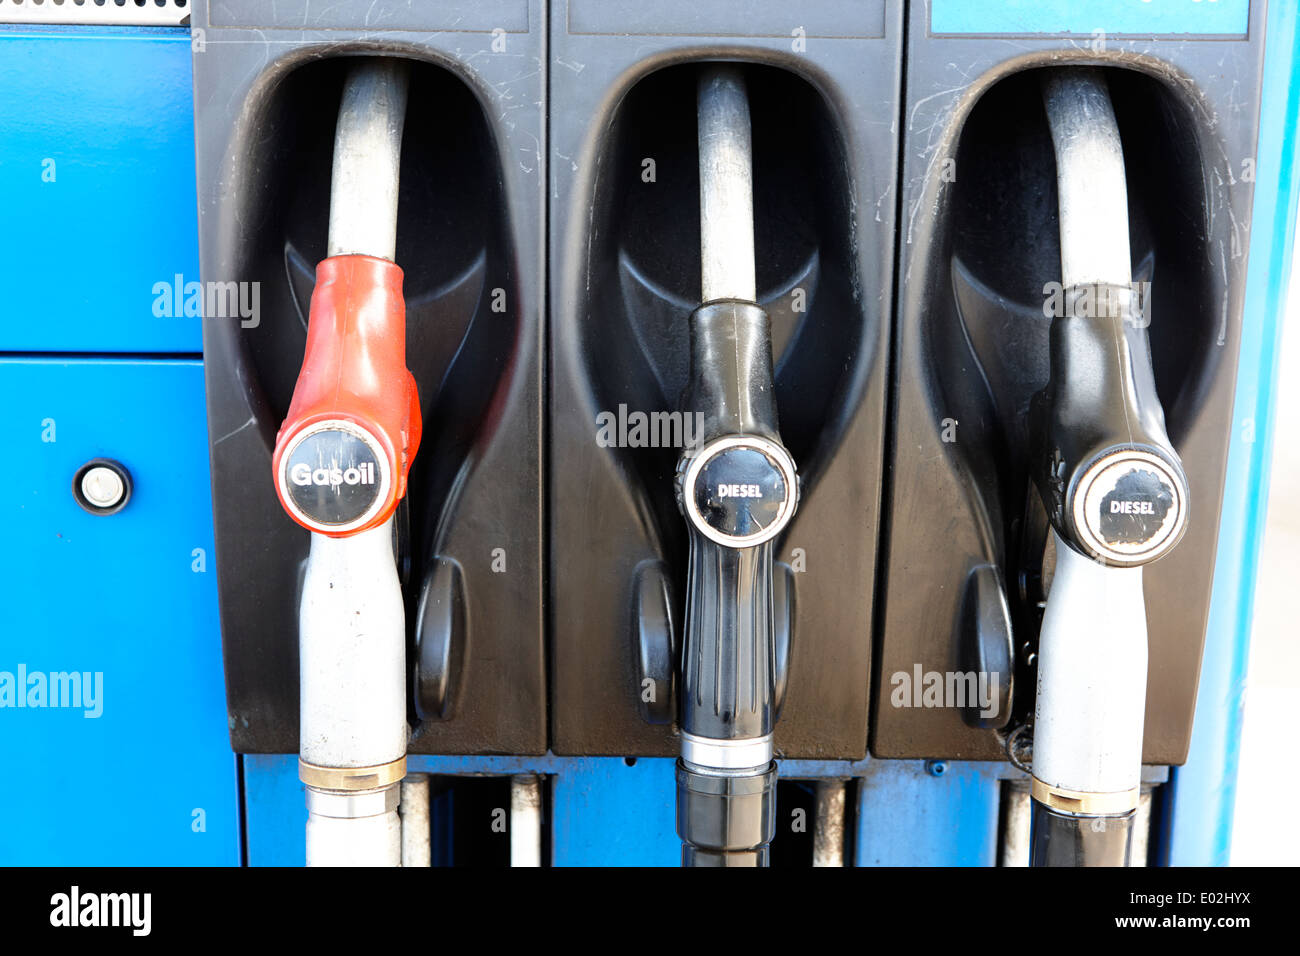 gas oil diesel and high speed biofuel diesel pumps at a petrol station northern ireland Stock Photo